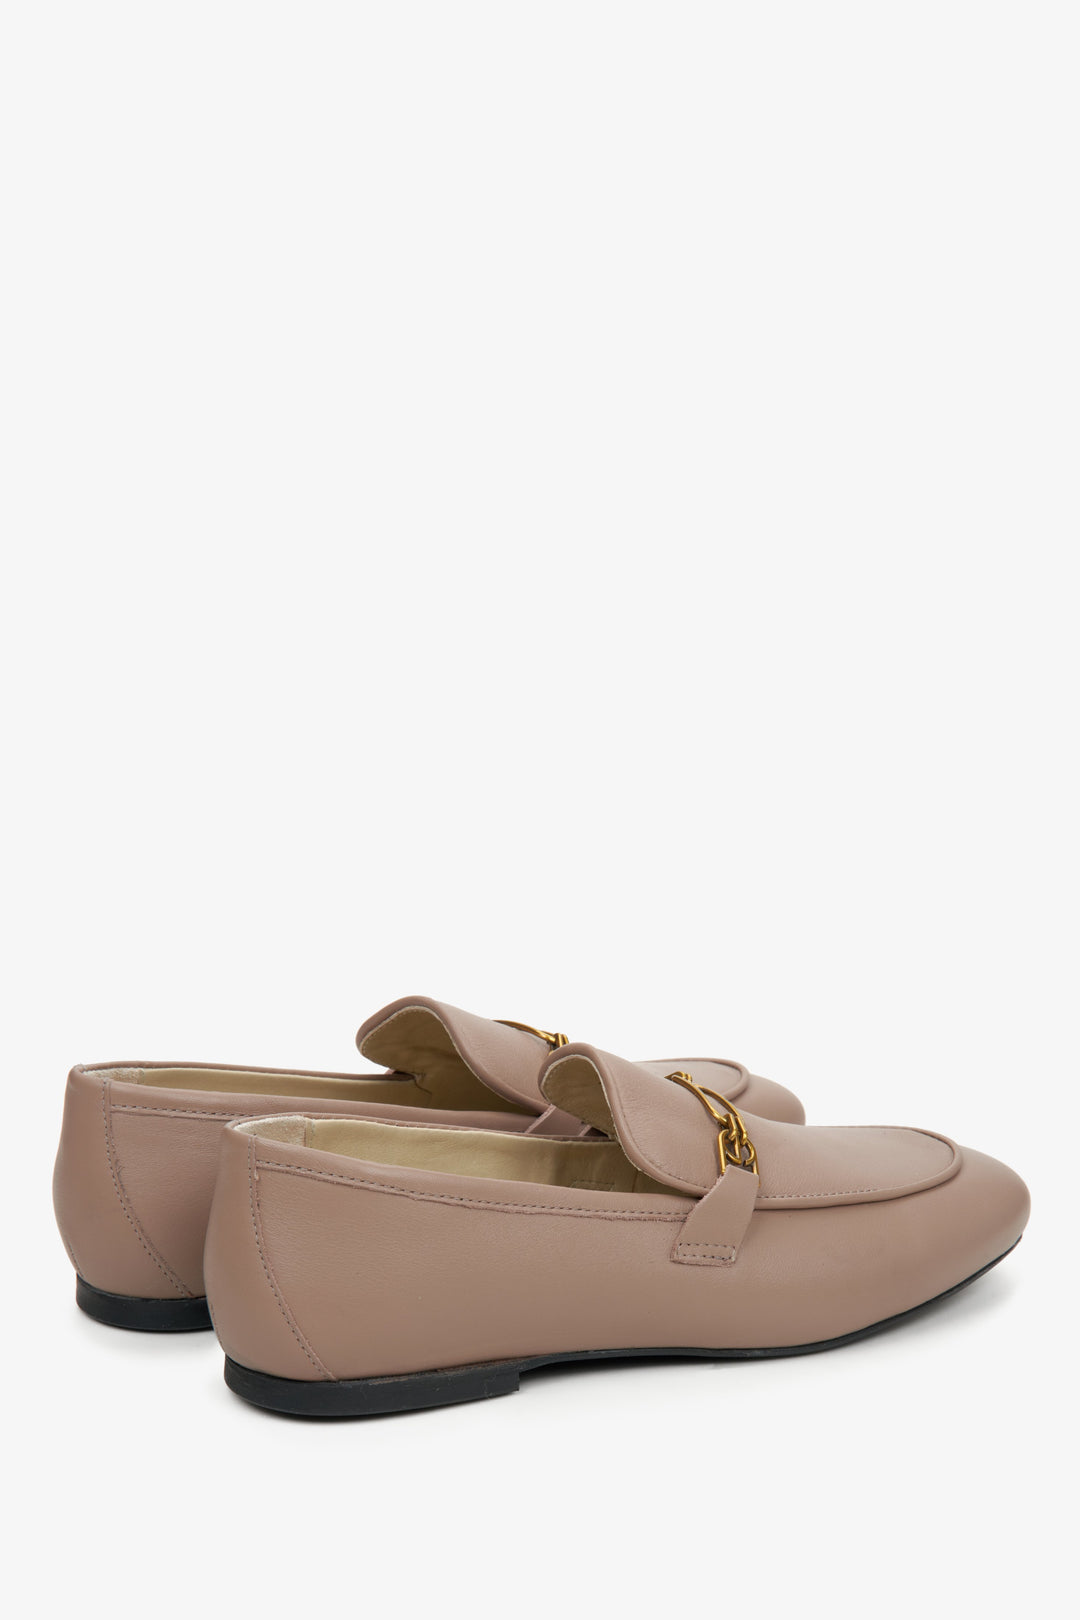 Women's beige loafers made of genuine leather Estro - a close-up on shoe heel counter.